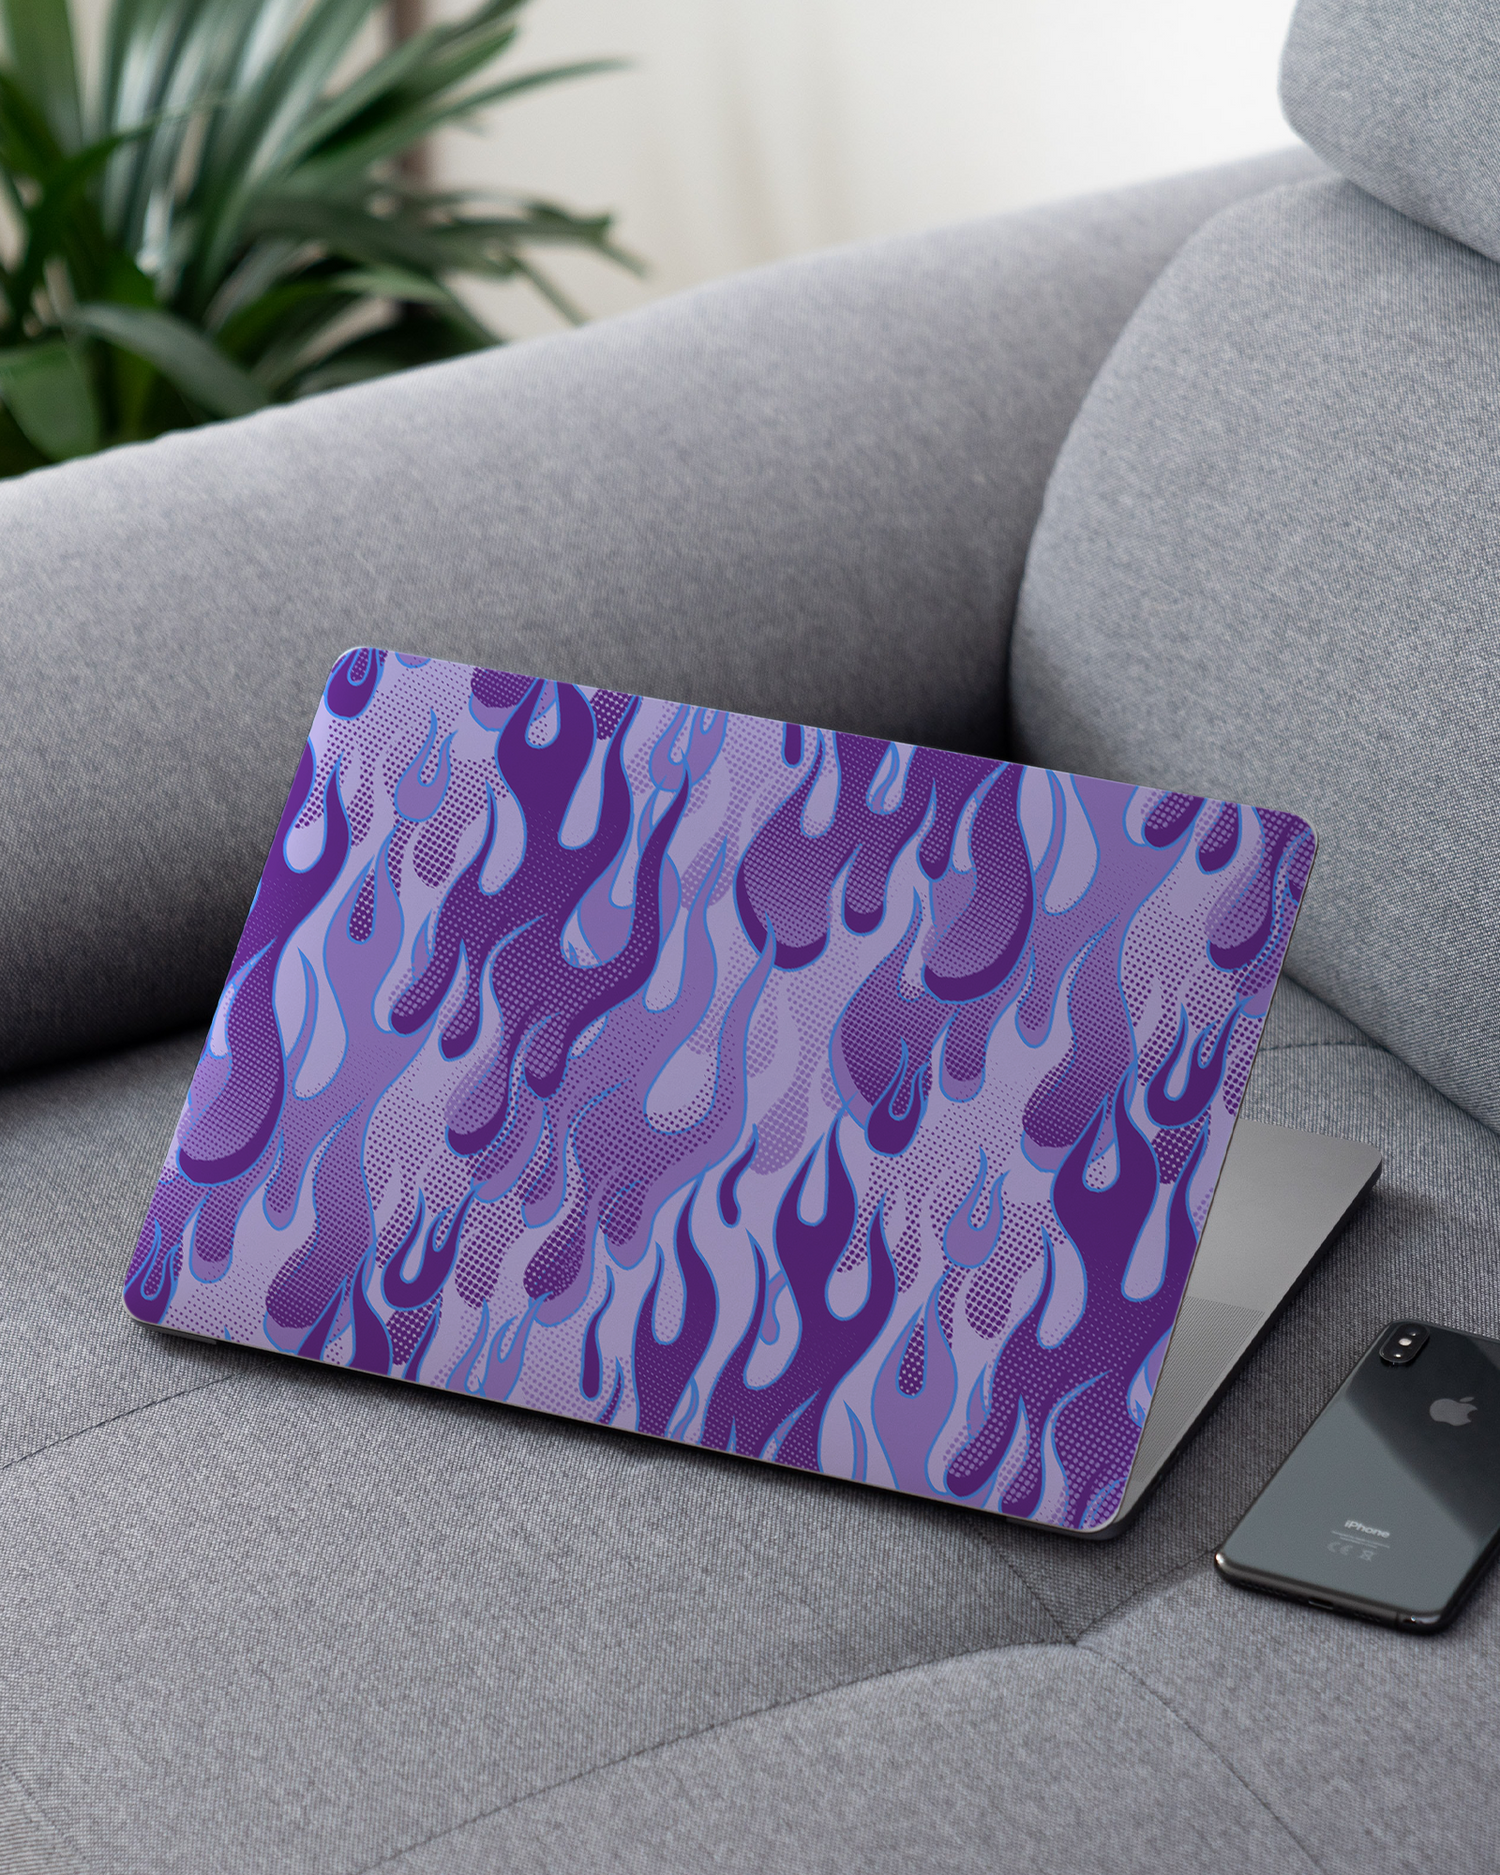 Purple Flames Laptop Skin for 13 inch Apple MacBooks on a couch